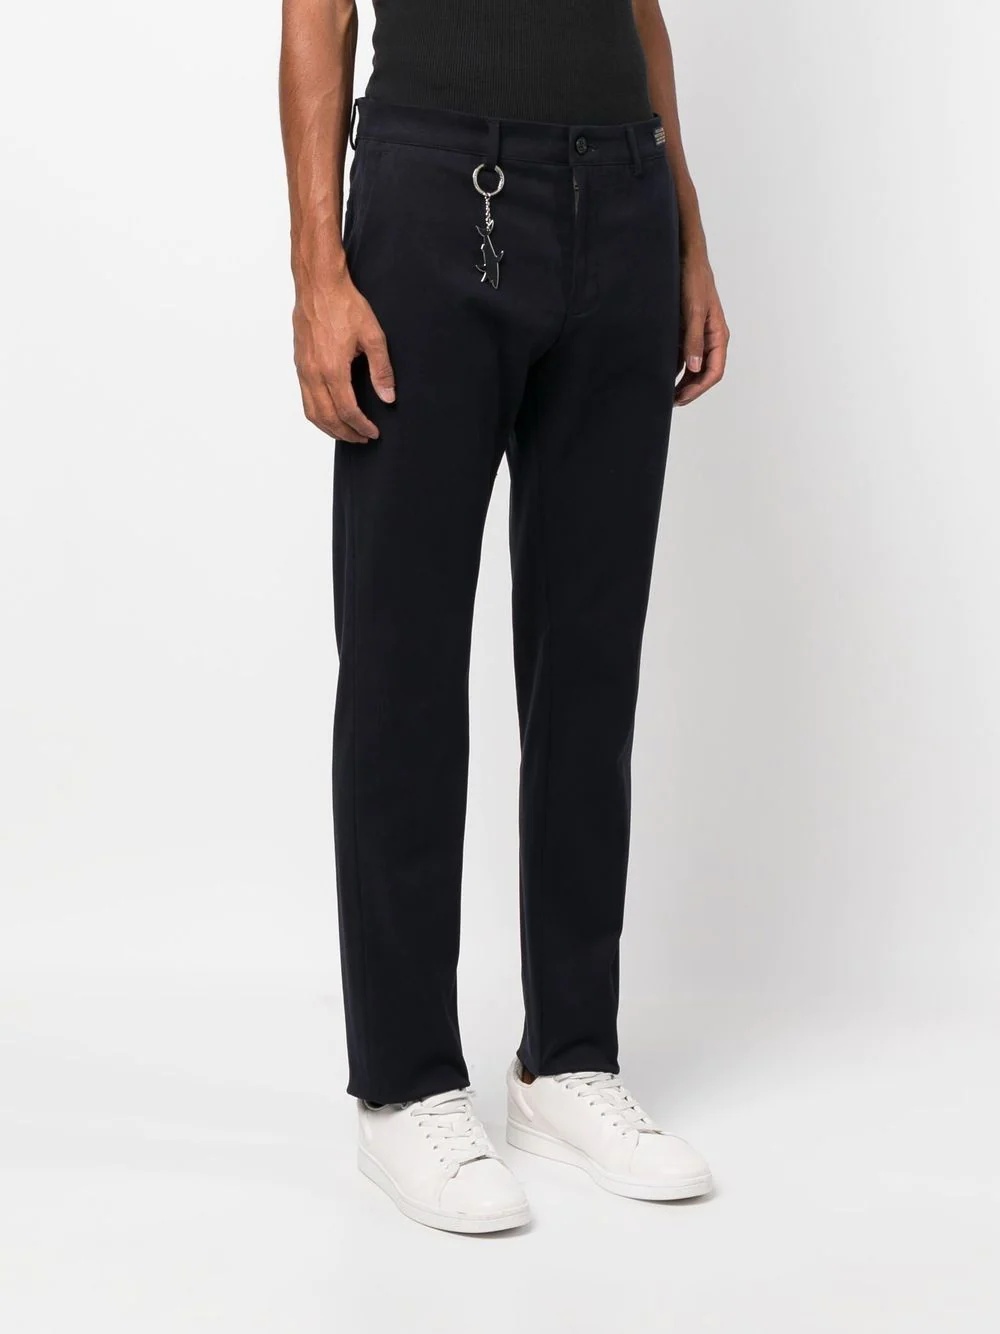 Save the Sea cotton trousers - 3